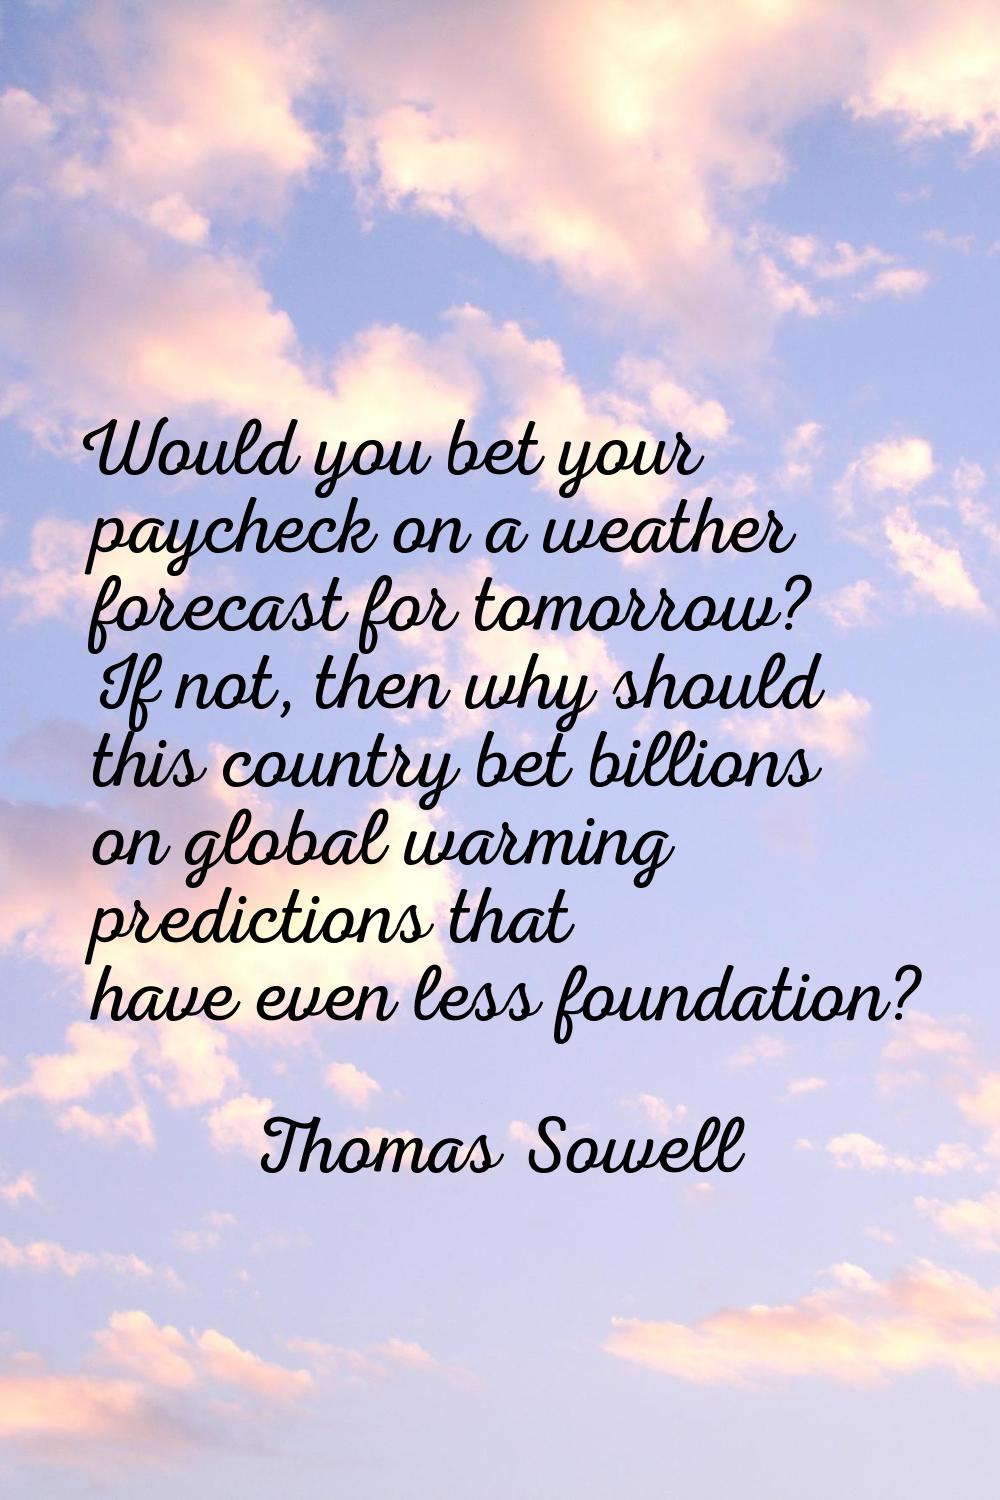 Would you bet your paycheck on a weather forecast for tomorrow? If not, then why should this countr